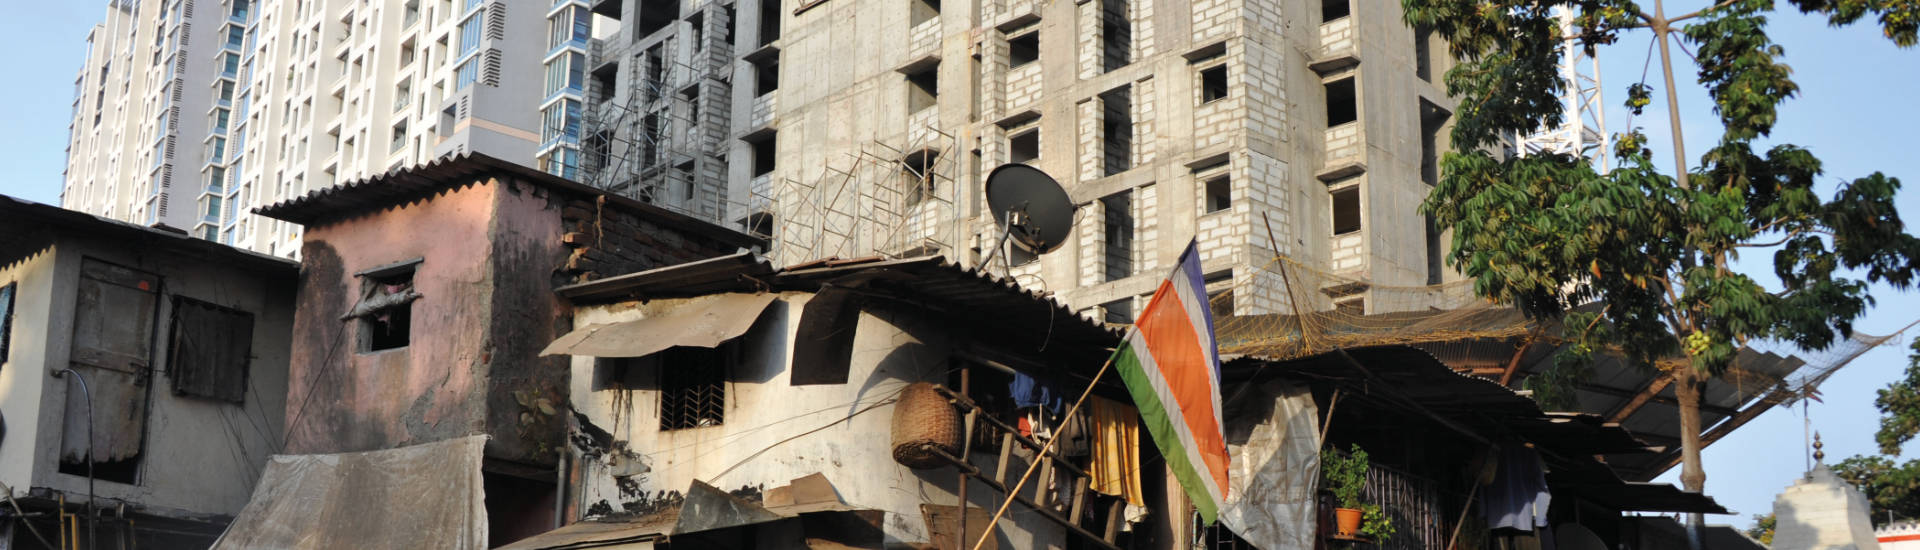 Inner-city disparities in Mumbai in a confined space: slum settlement in front of high-rise buildings